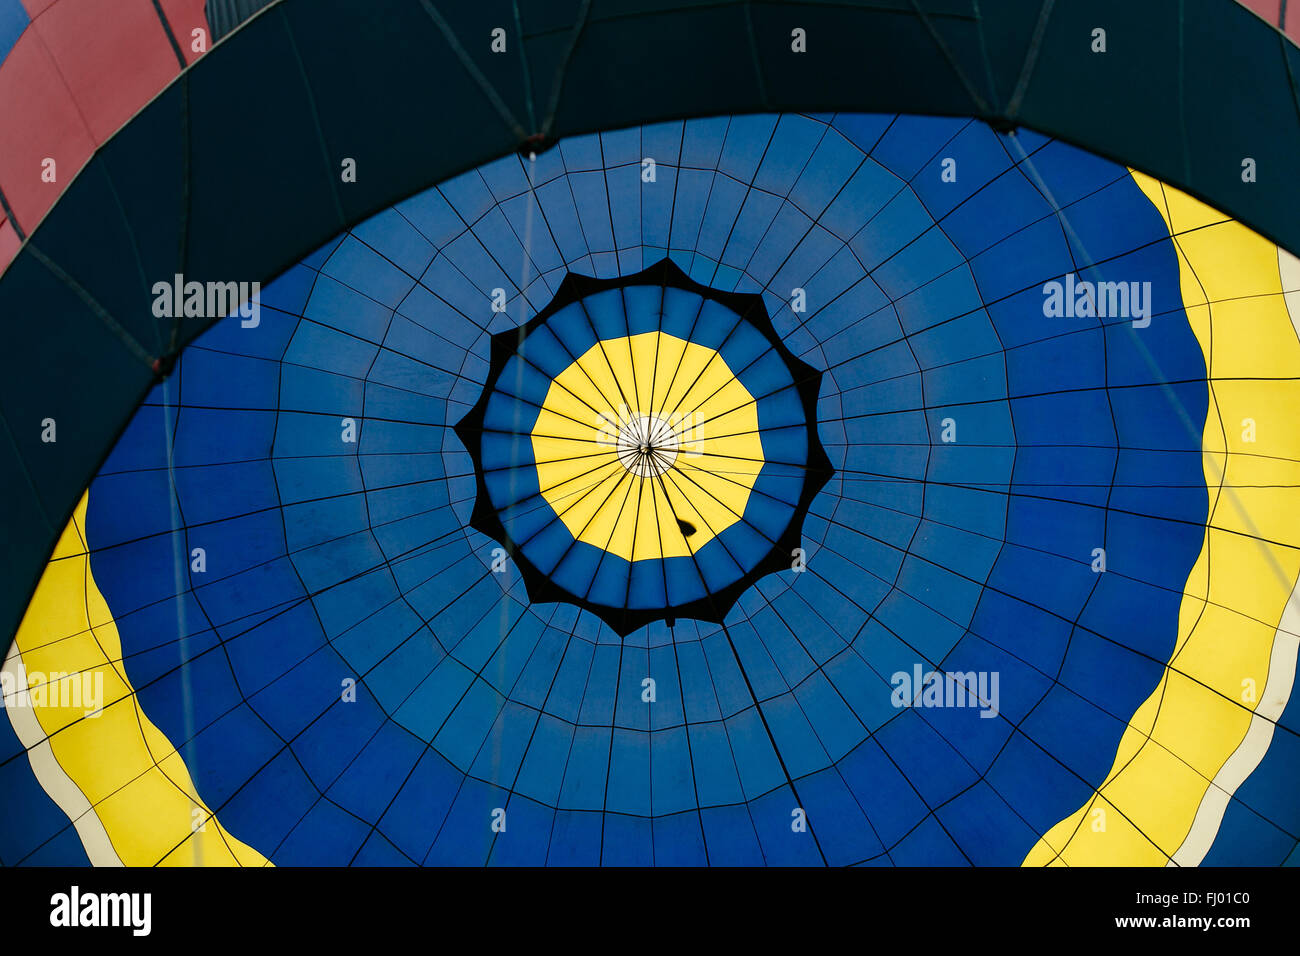 Inside the blue and yellow air balloon with stripes Stock Photo